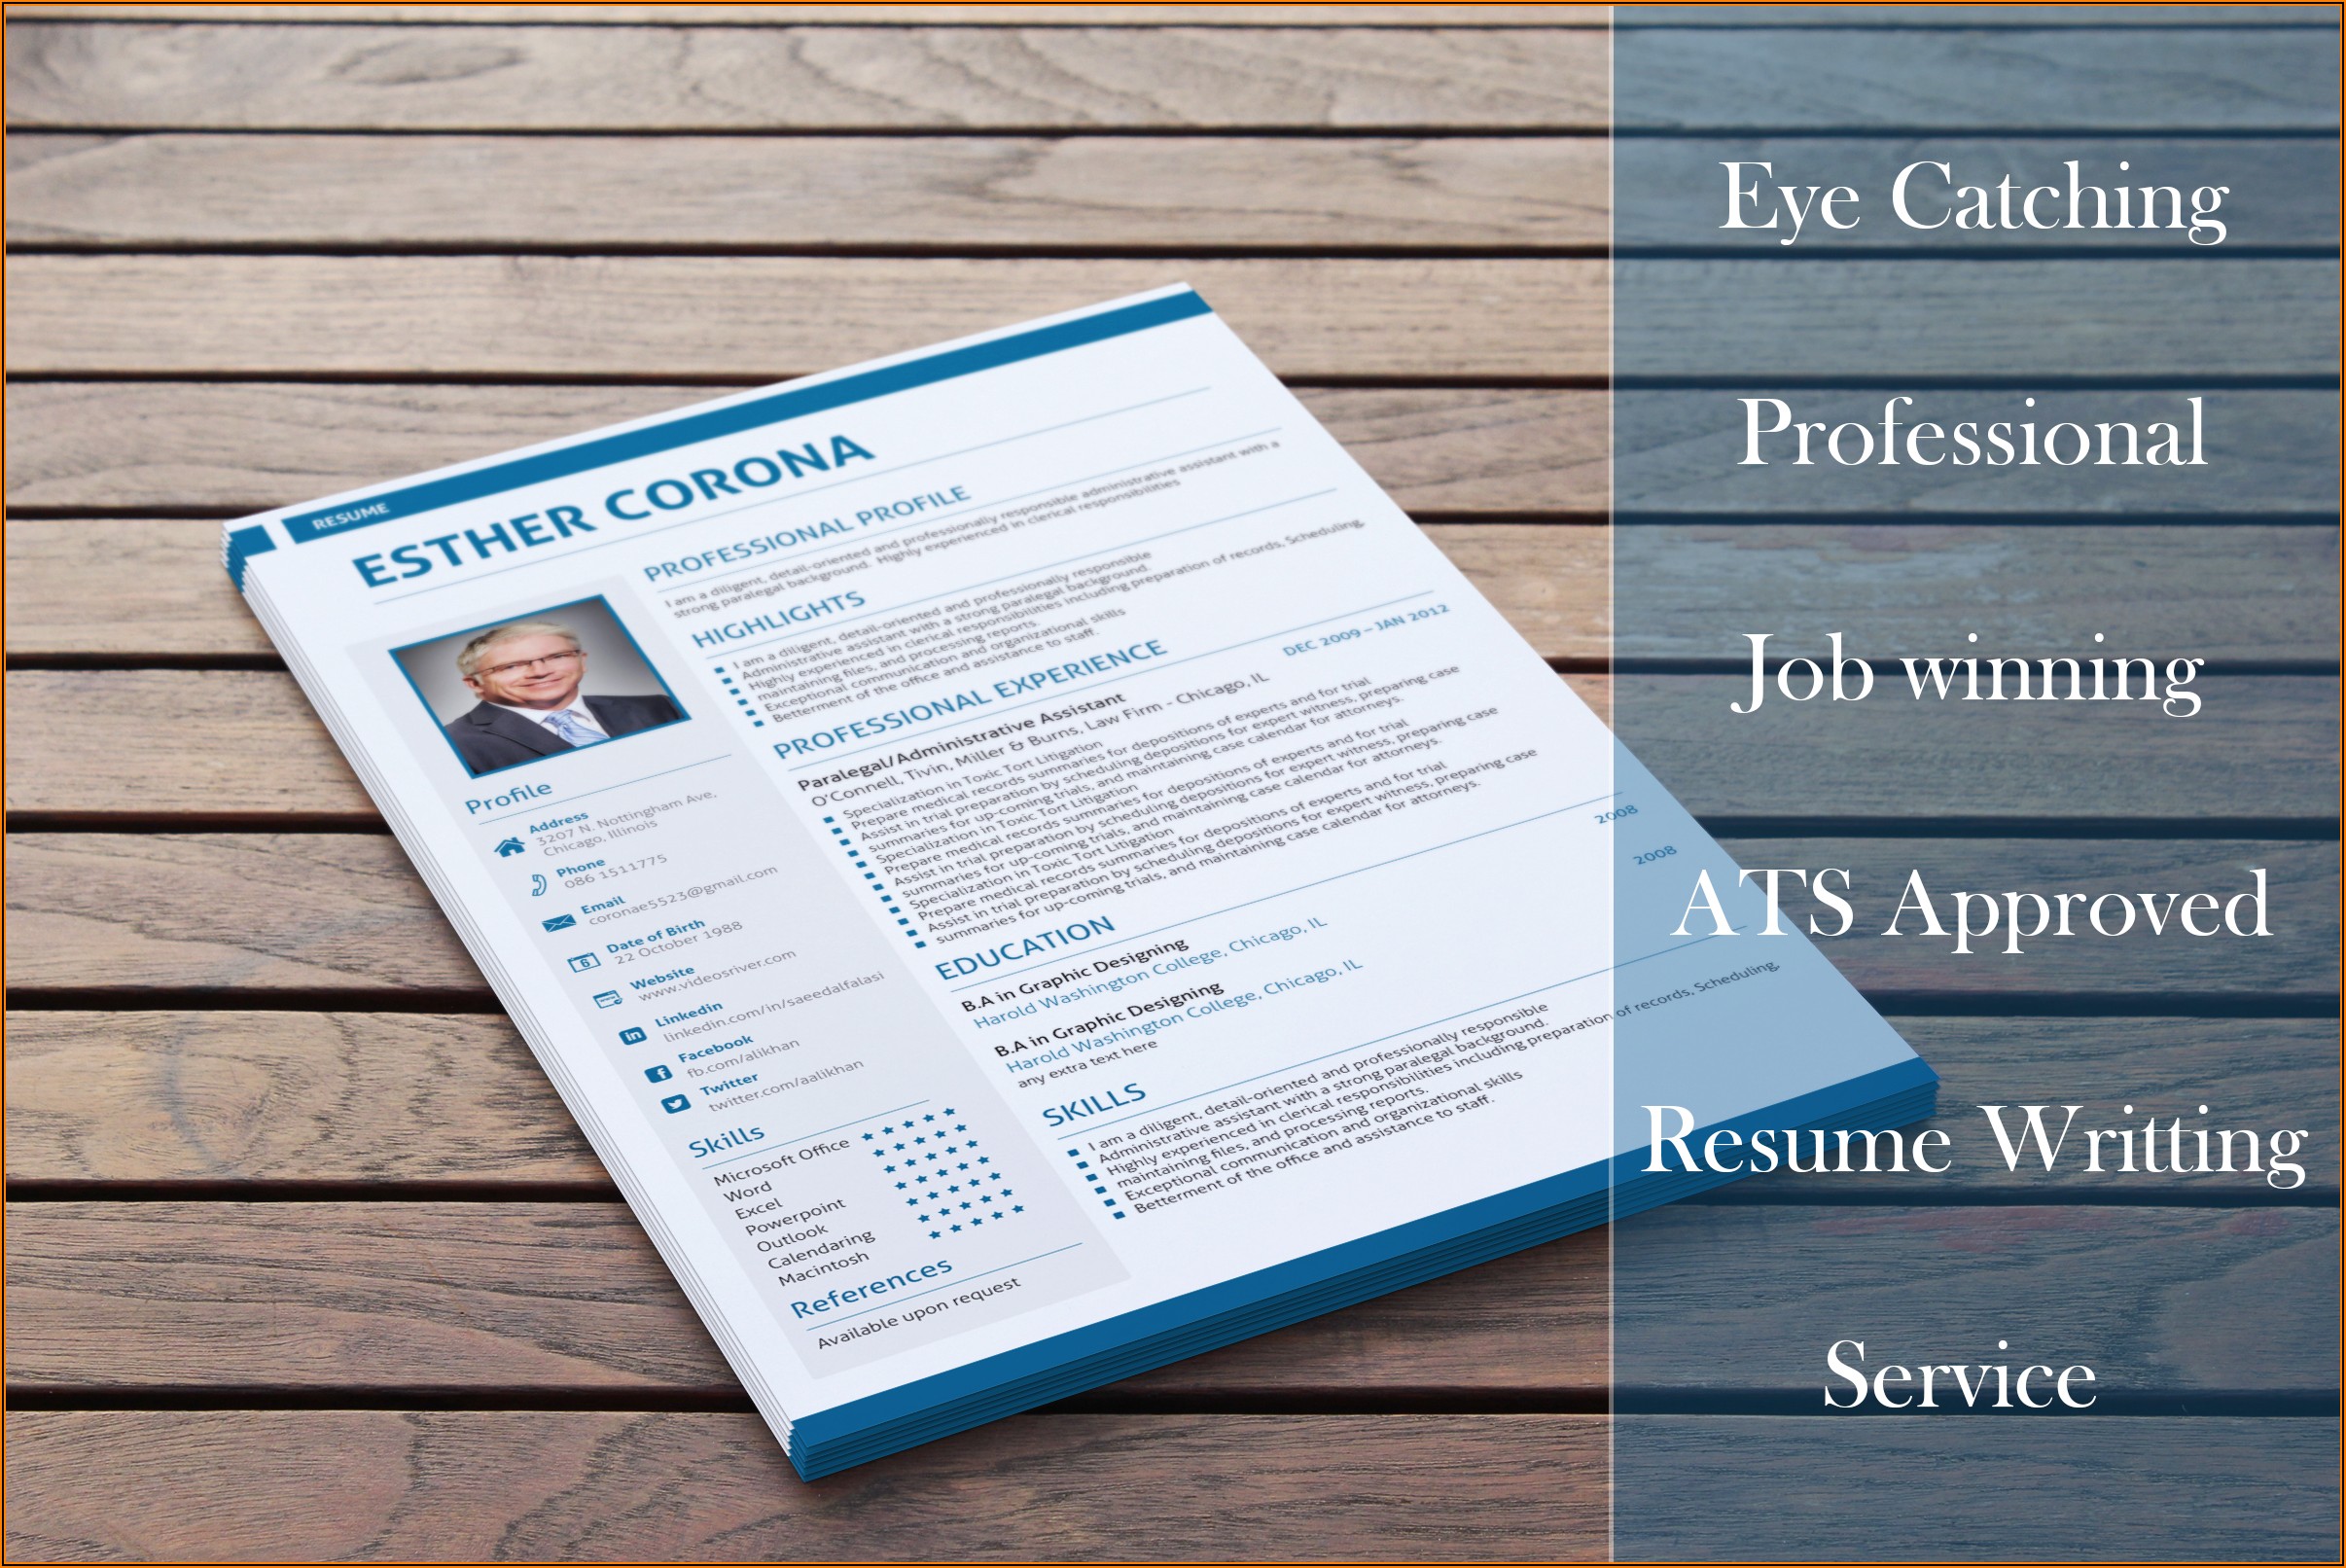 Professional Resume Writing Services Online